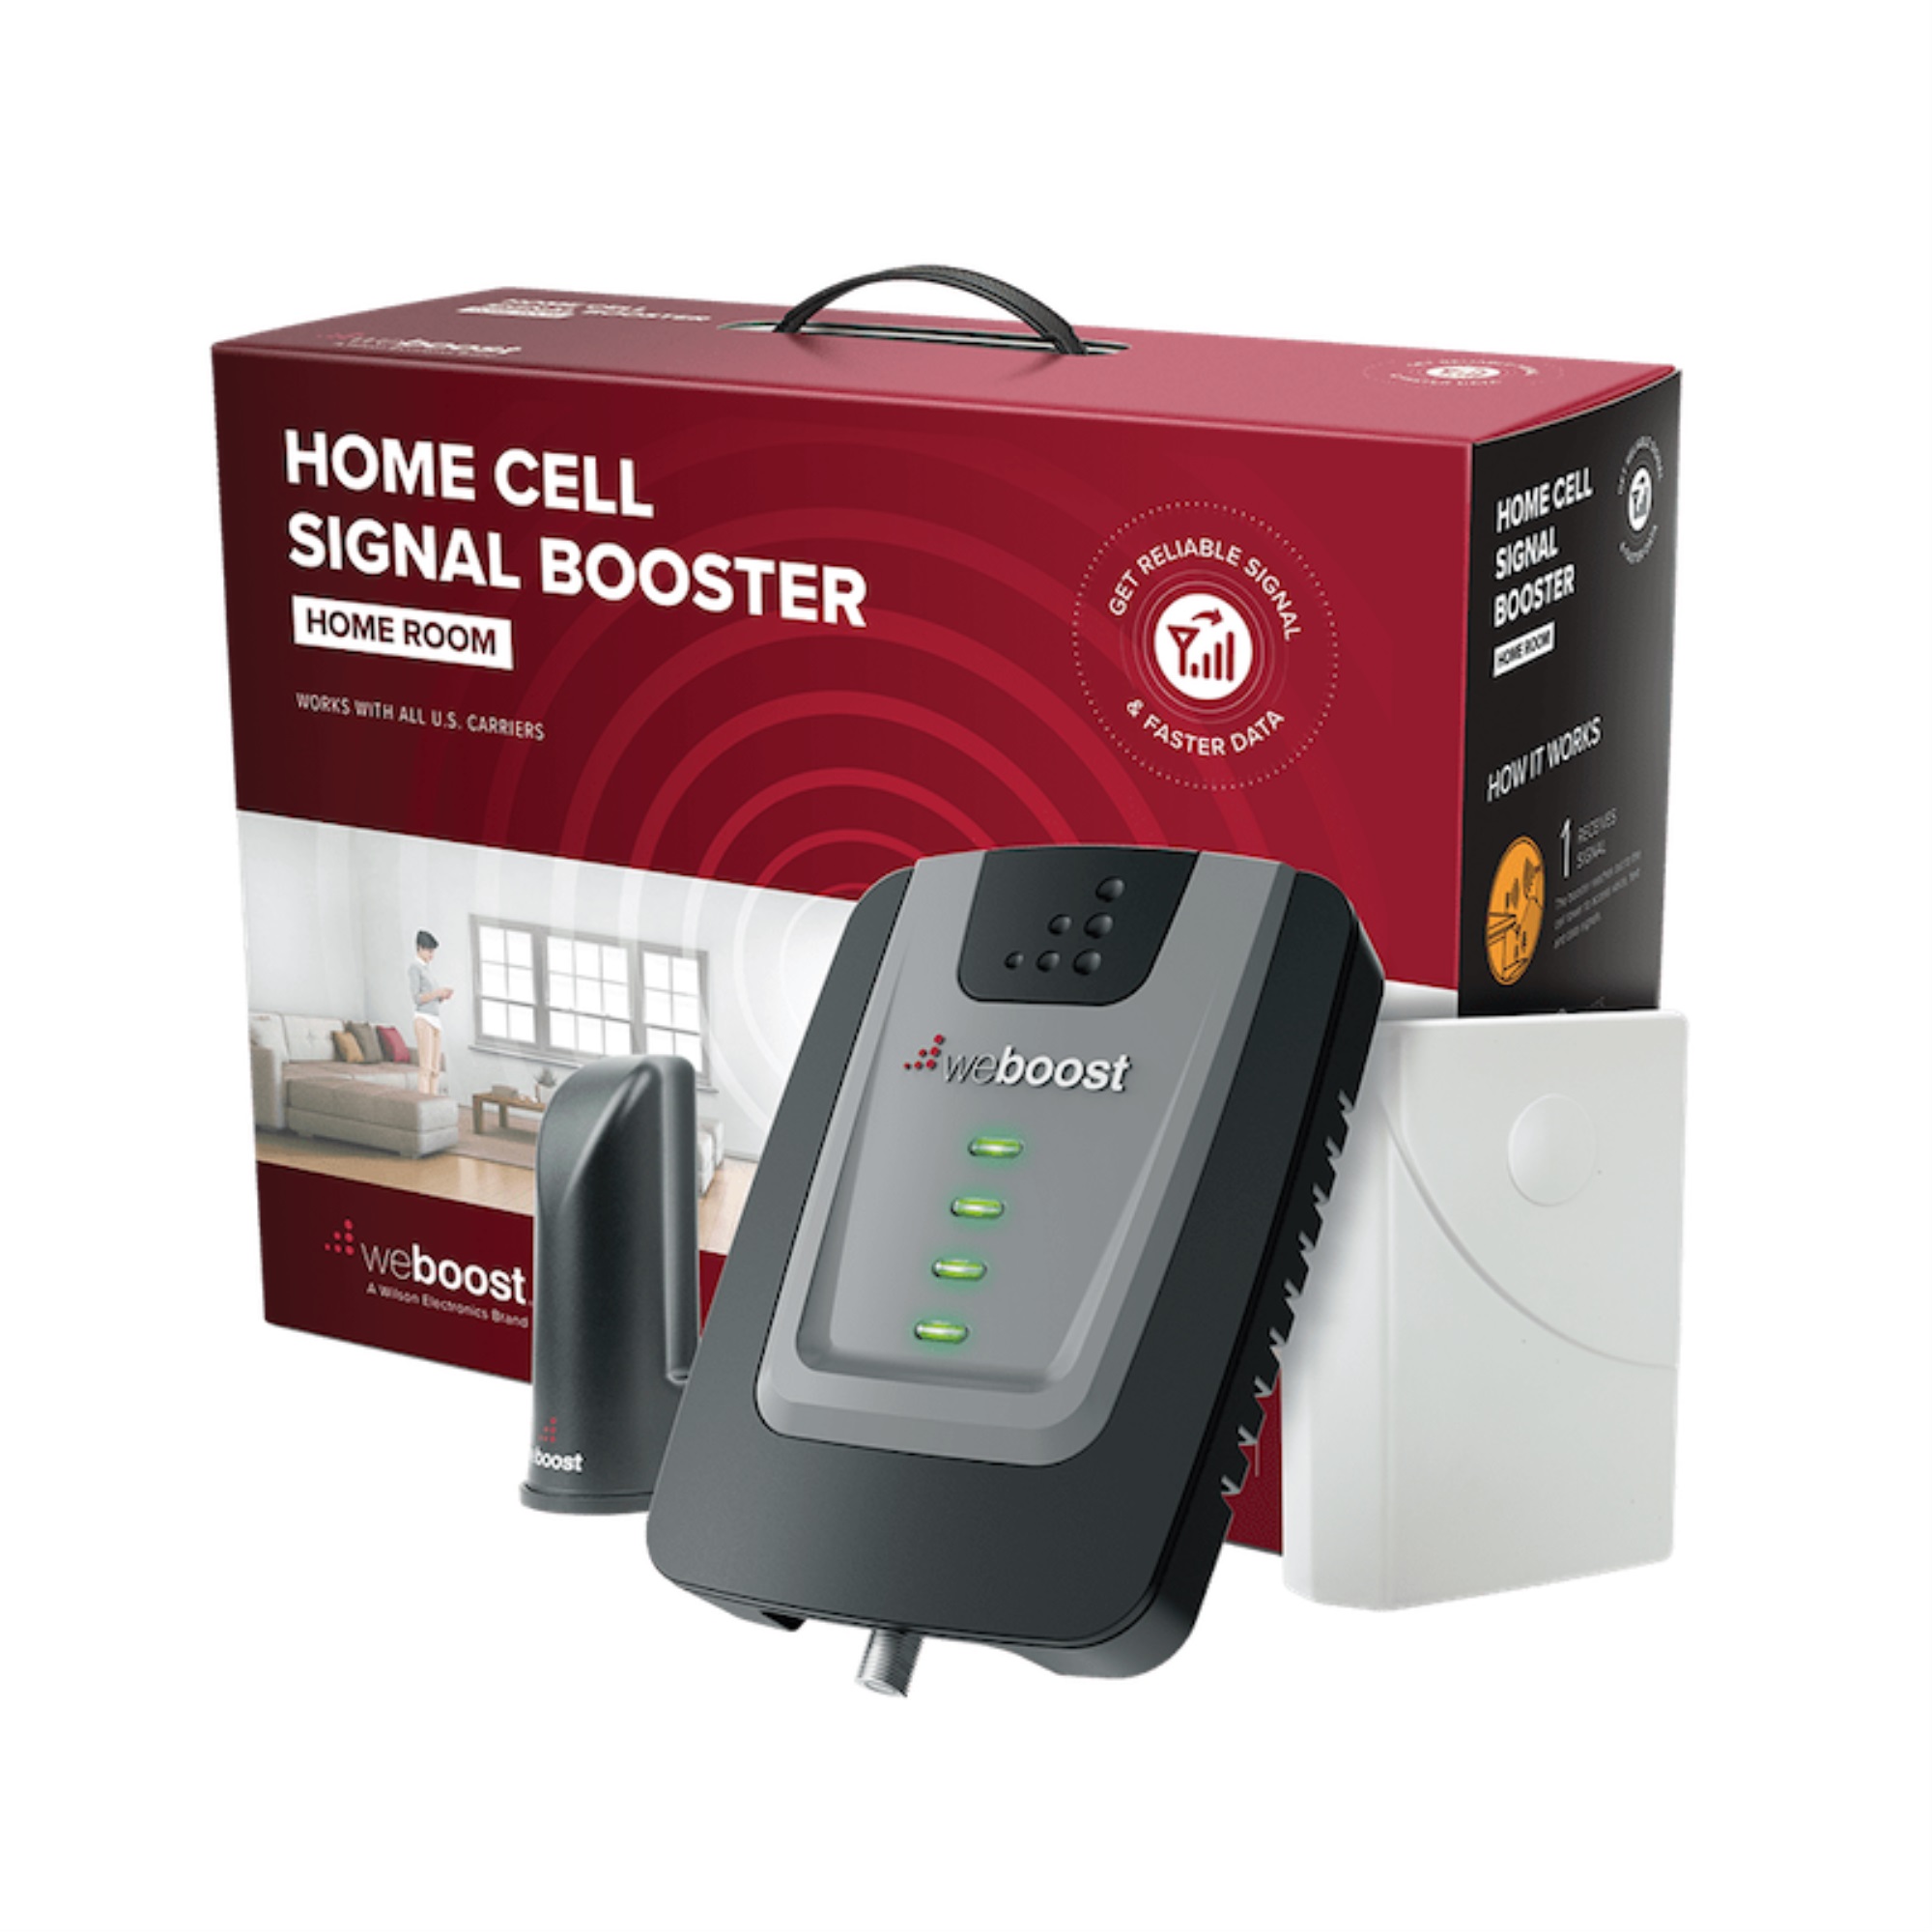 weBoost Home Room, Cell Phone Signal Booster Kit for 1 Room, Boosts 4G LTE & 5G for all U.S. Carriers, FCC Approved (Model 472120) - image 1 of 8